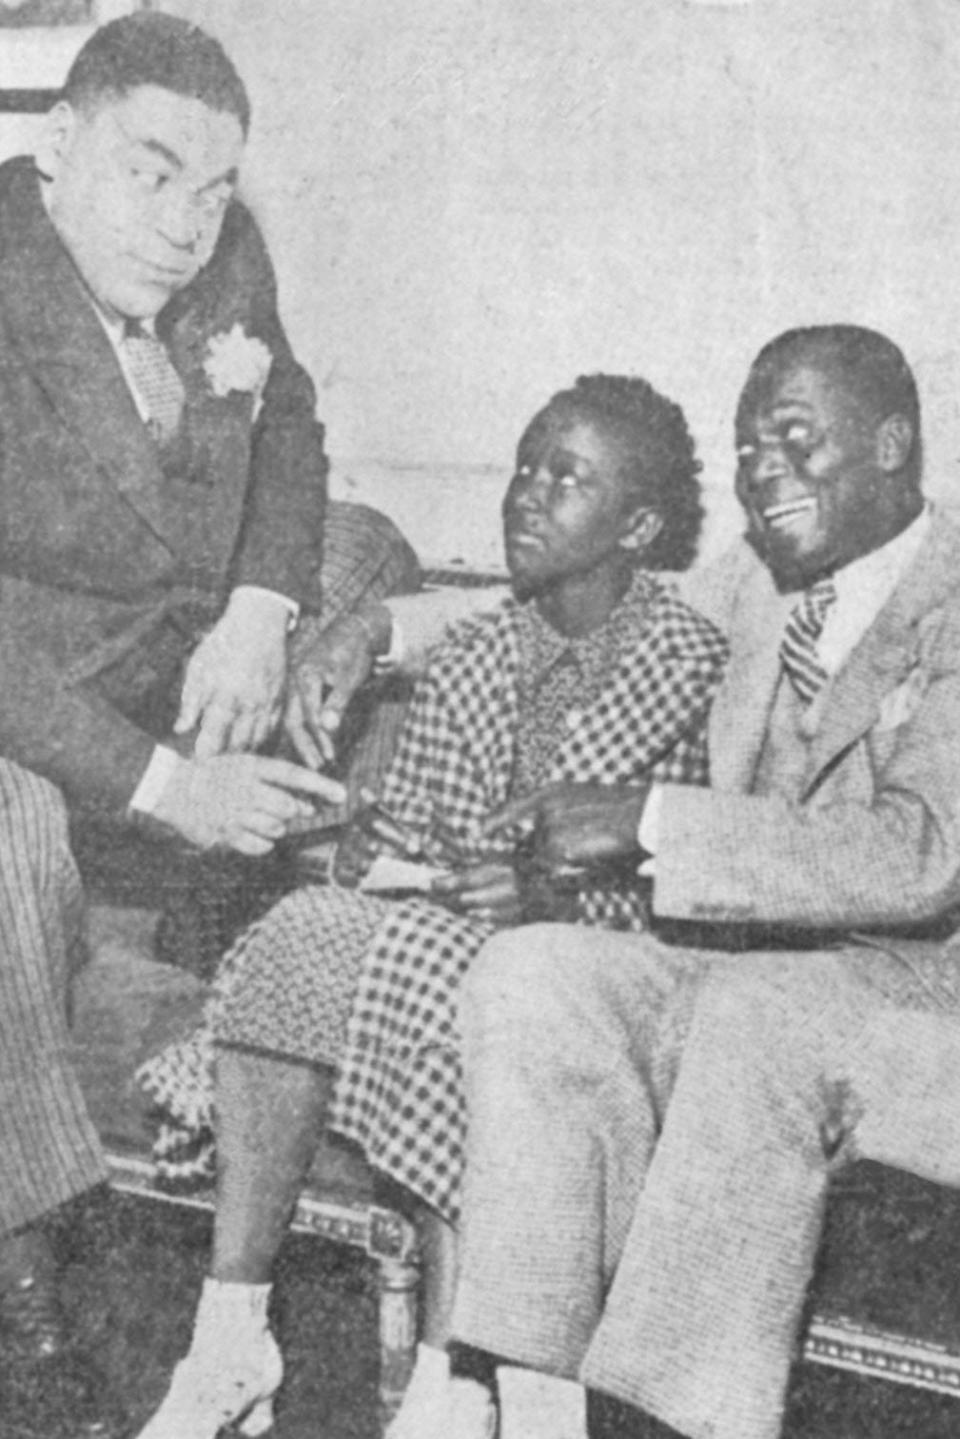 Akron spelling champ MacNolia Cox, 13, meets composer Fats Waller, left, and dancer Bill "Bojangles'' Robinson on May 4, 1936, at the RKO Palace Theatre in Cleveland.